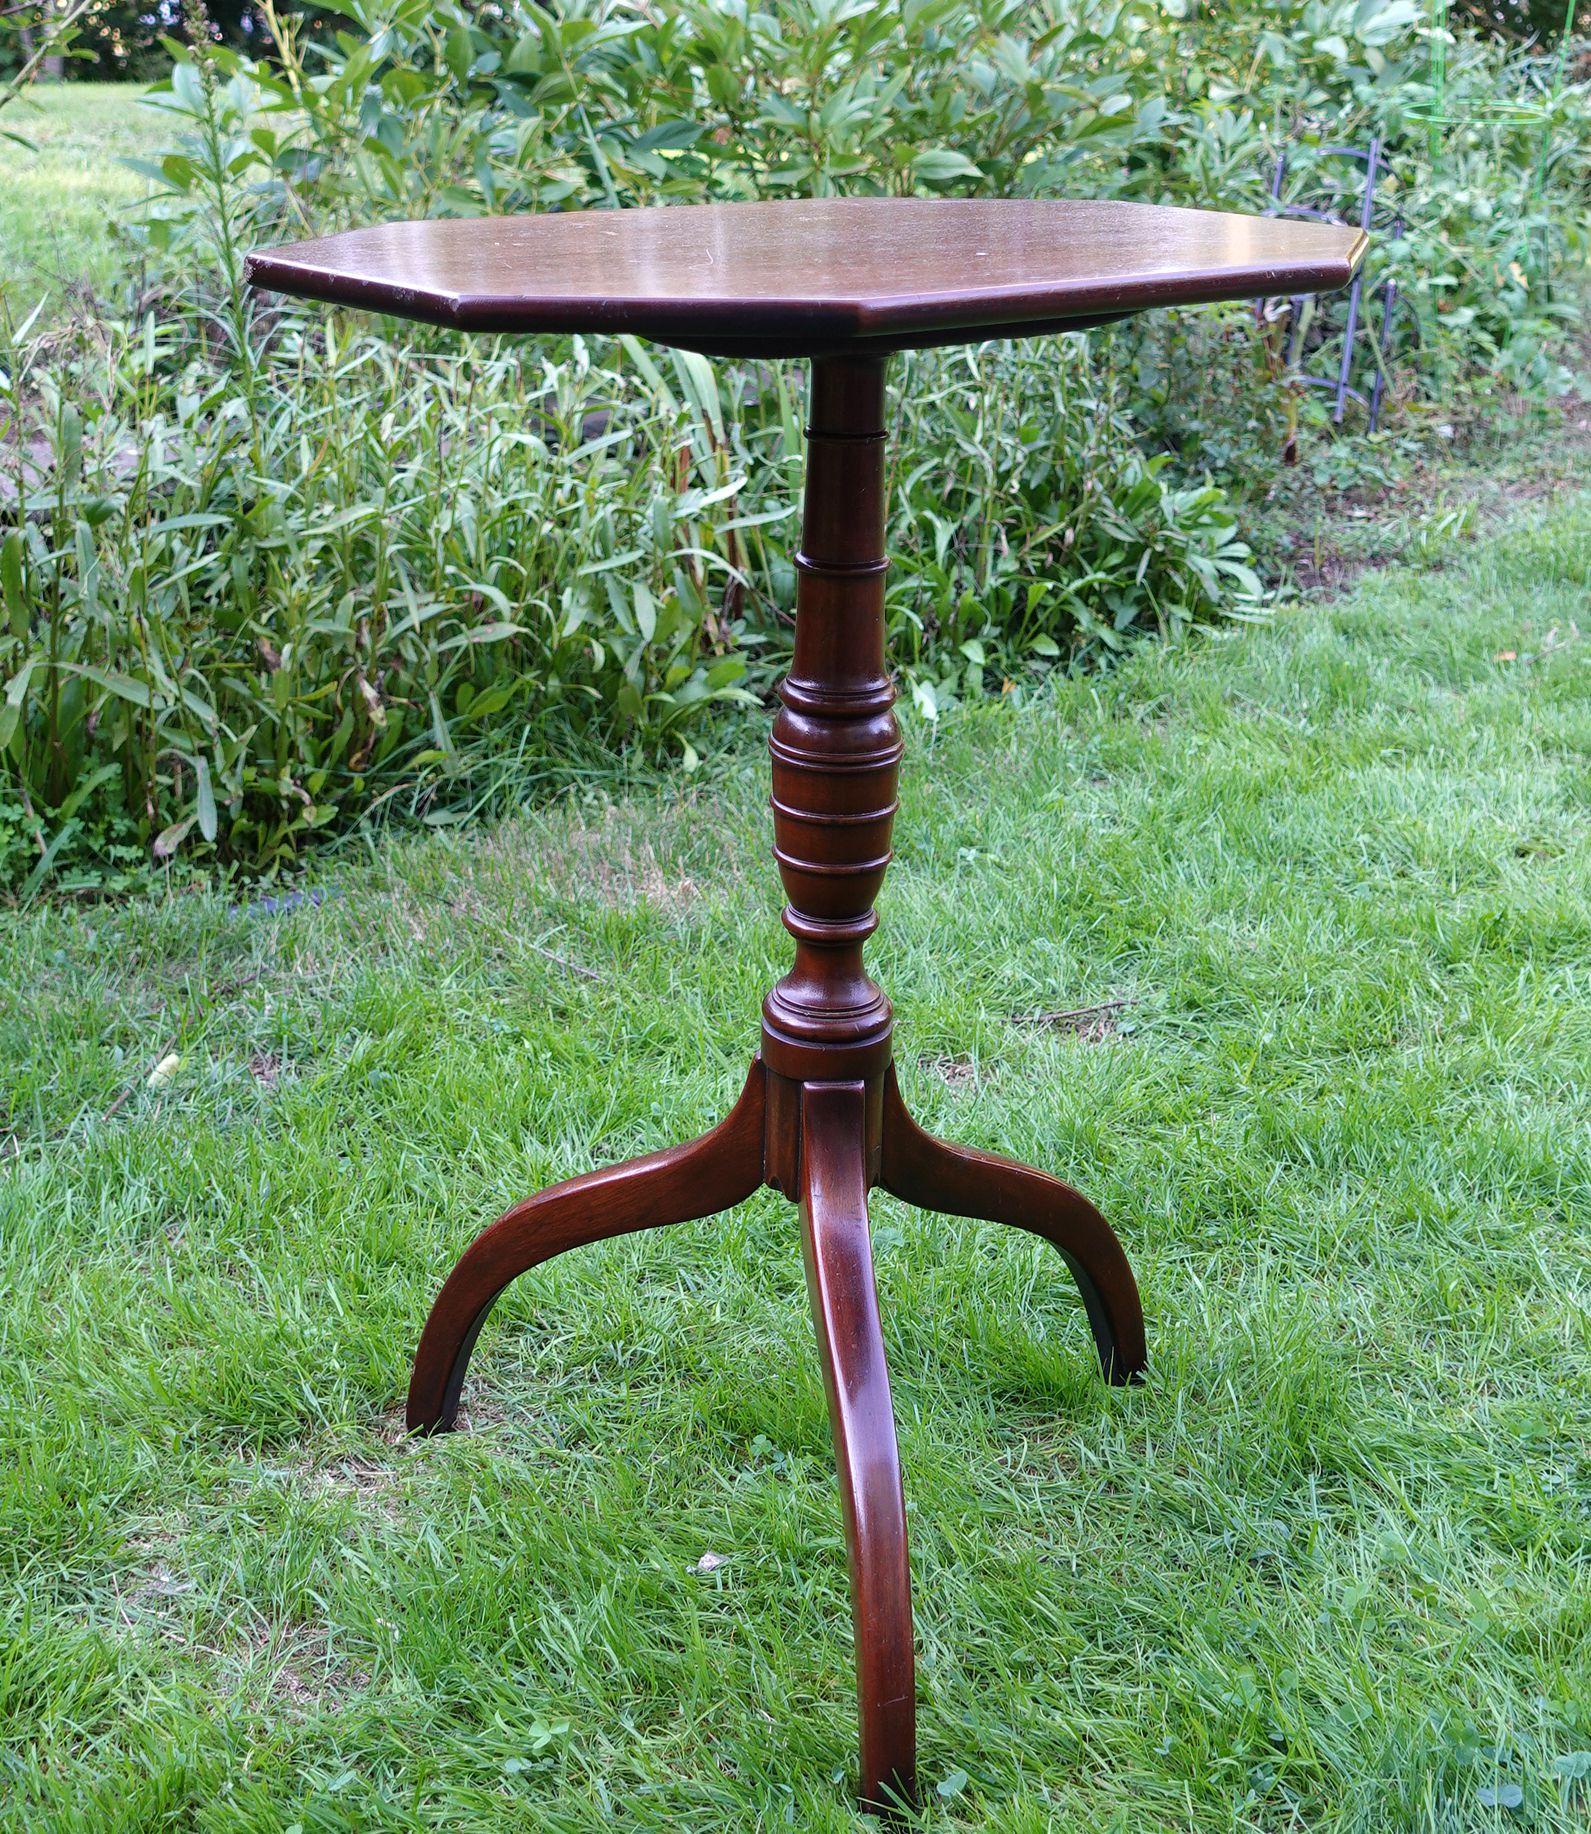 19th century
Elongated Mohagany octagonal tilt-top over finely turned column supported by three shapely legs.
Measures: 28